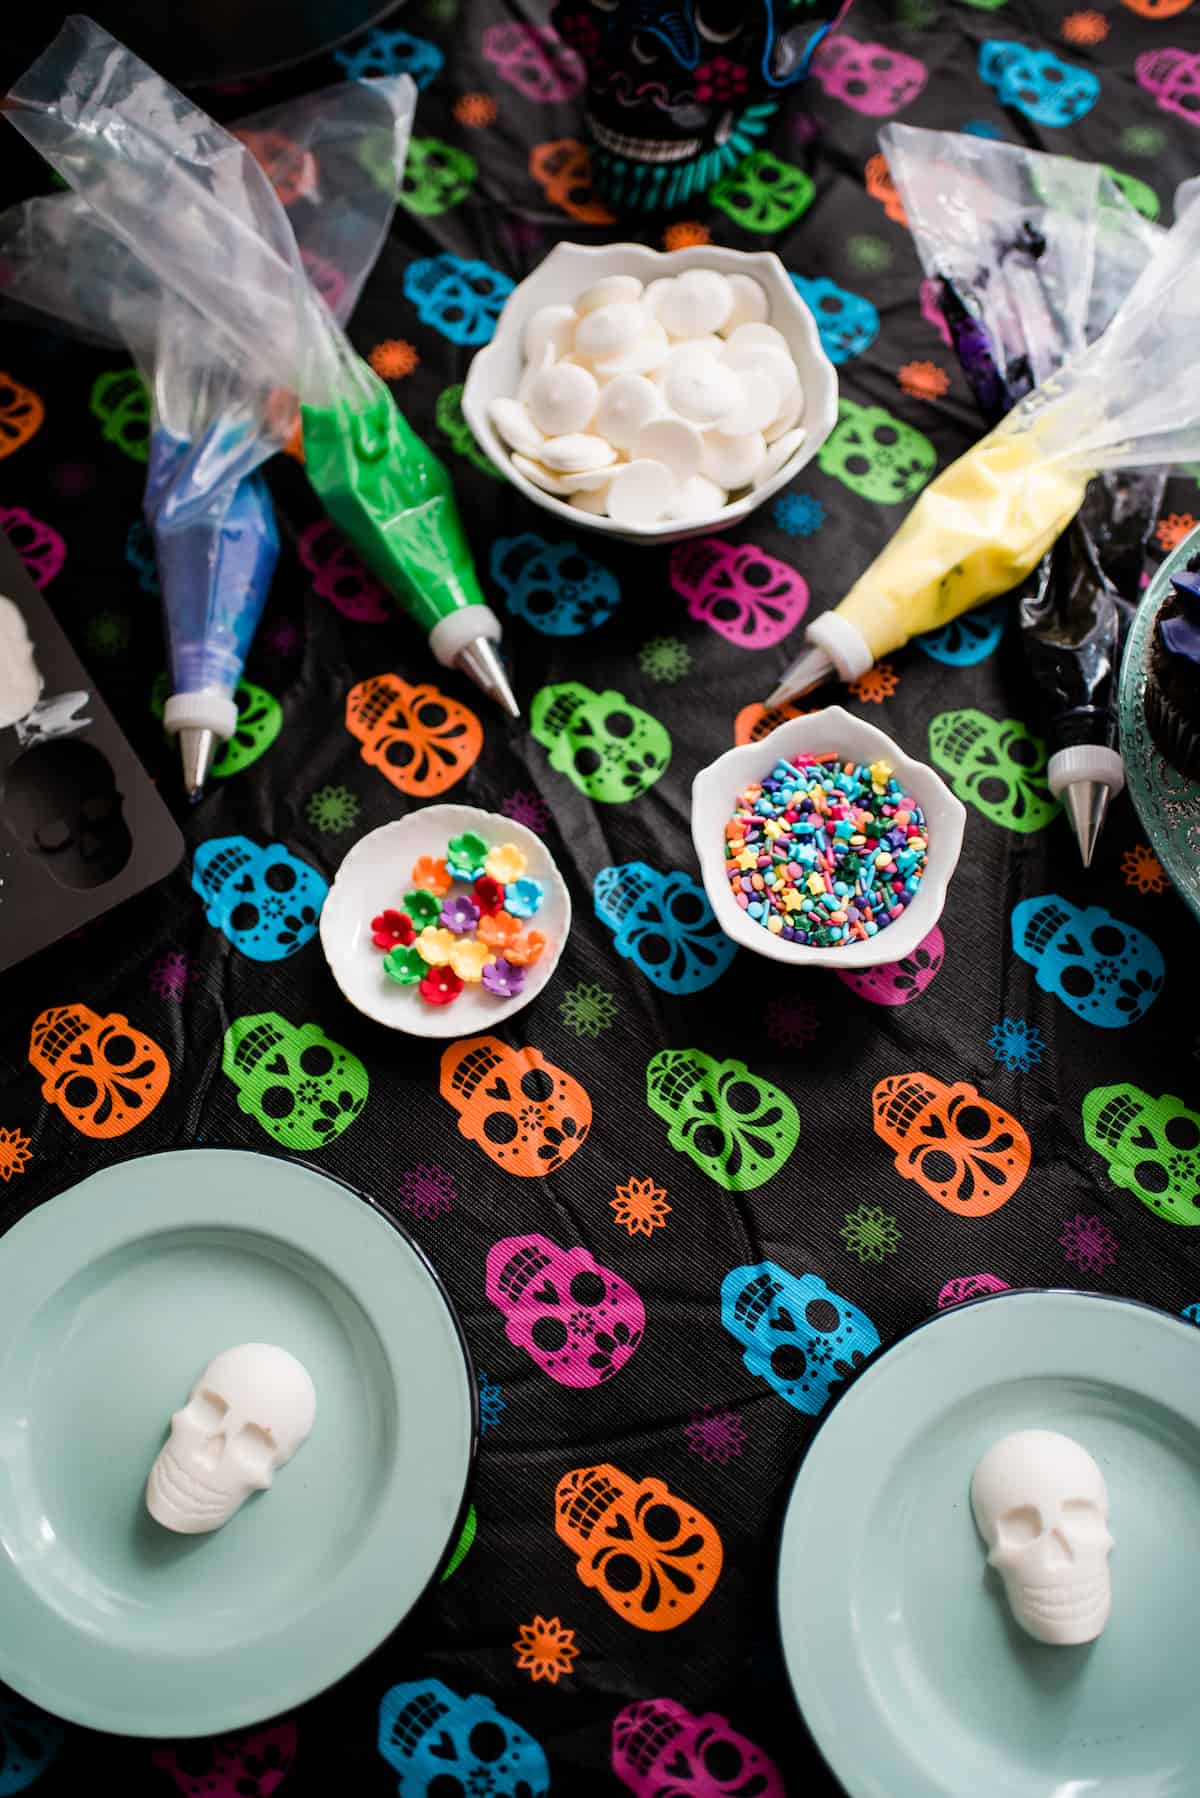 Undecorated white chocolate skulls on blue plates with piping bas filled with colorful frosting, candy flowers, and sprinkles on top of a colorful skull tablecloth 